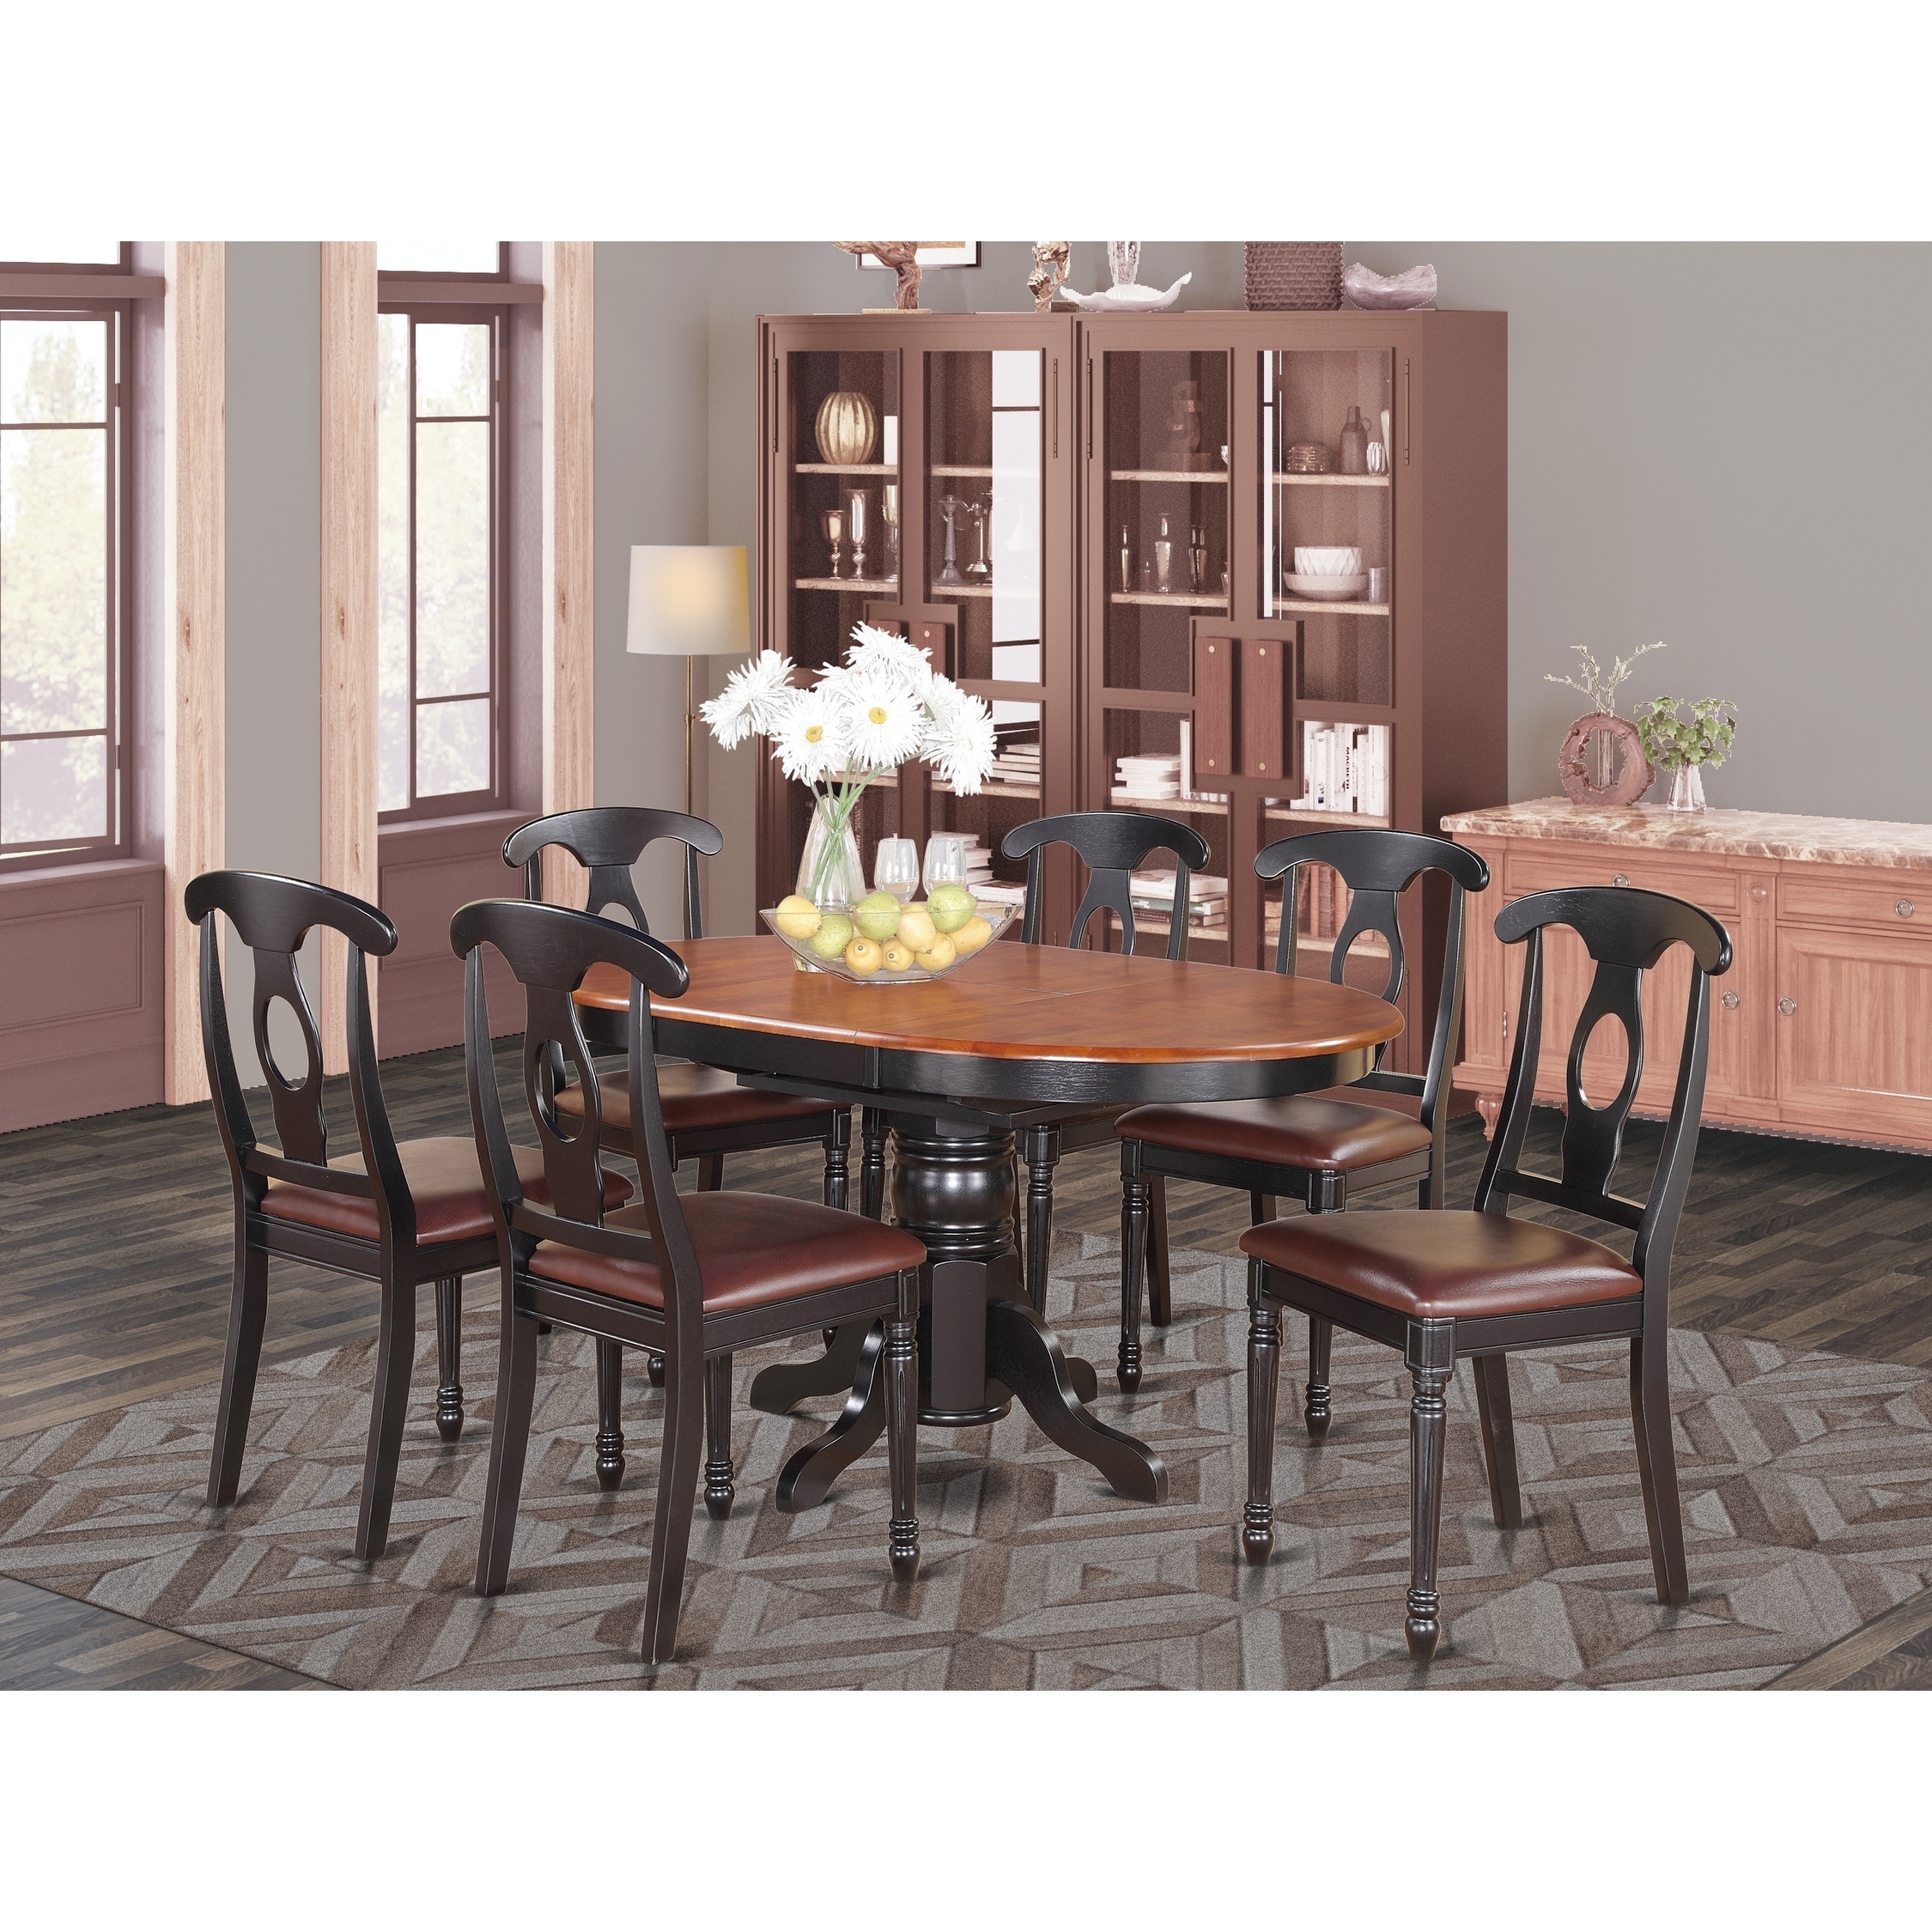 7 Piece Pedestal Oval Dining Table And 6 Dining Chairs Overstock 10296452 Wood Seat